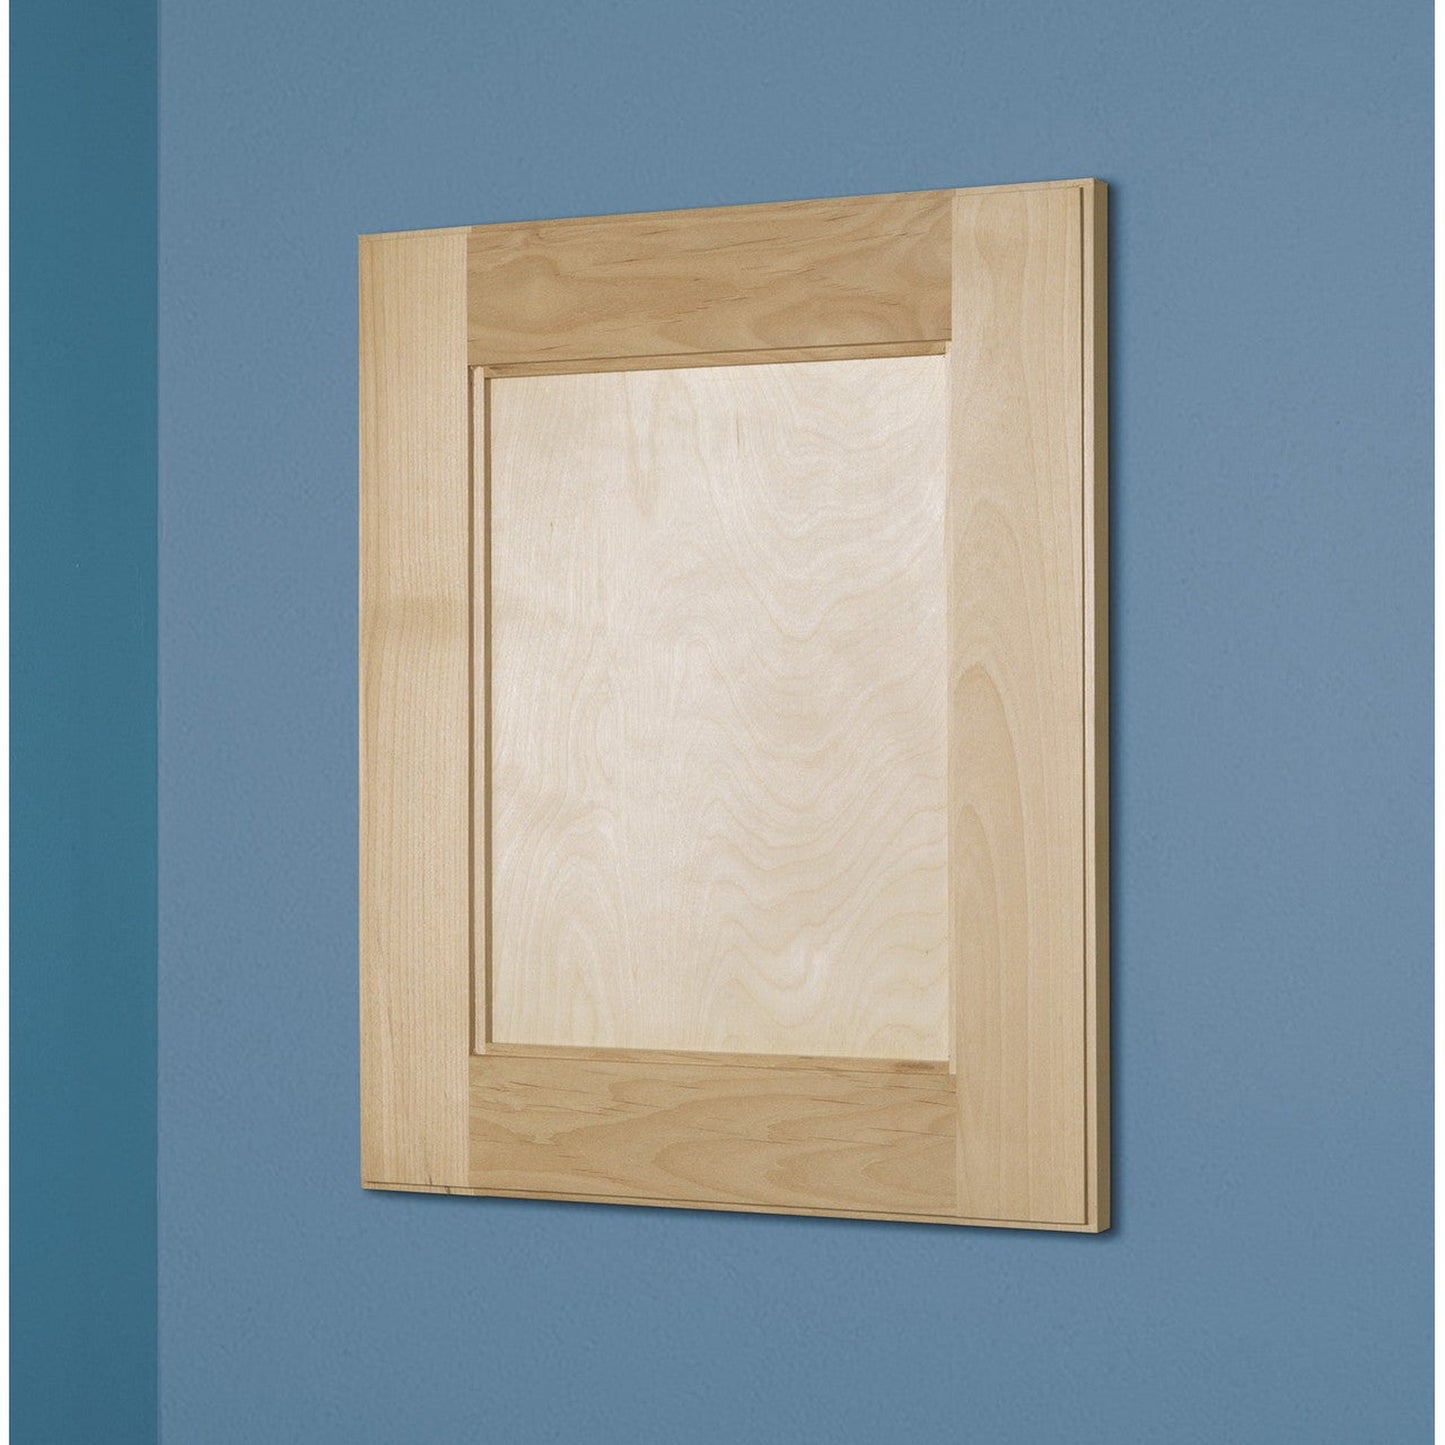 Fox Hollow Furnishings 14" x 18" Unfinished Style Beadboard Natural Interior Standard 4" Depth Recessed Medicine Cabinet